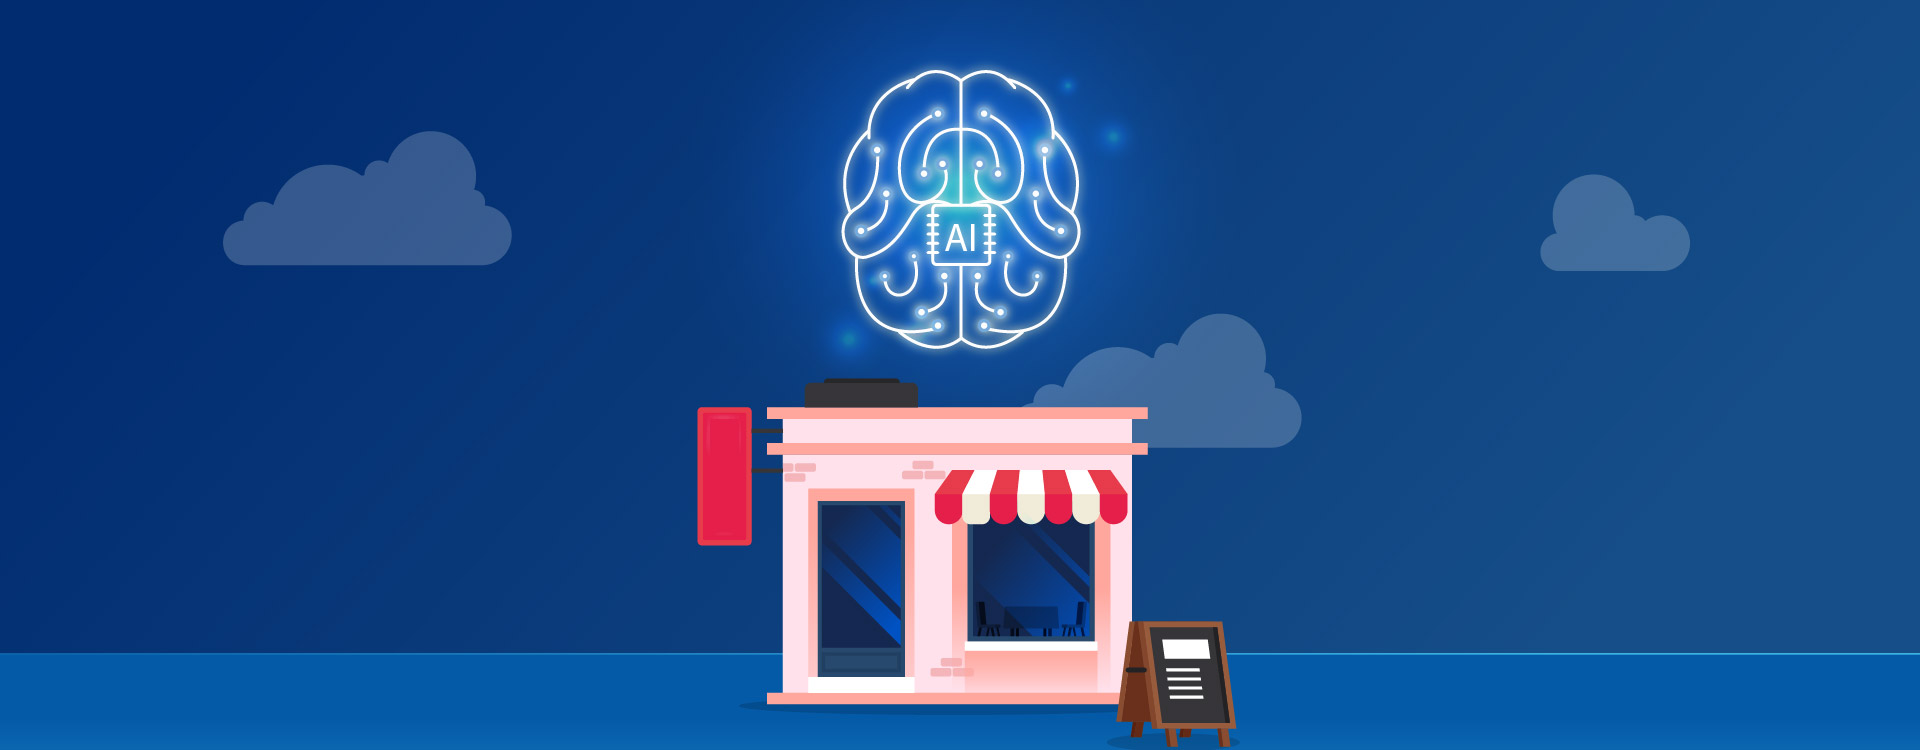 Dataiku Online is helping small business build their AI capabilities with its easy pre-built connectors.